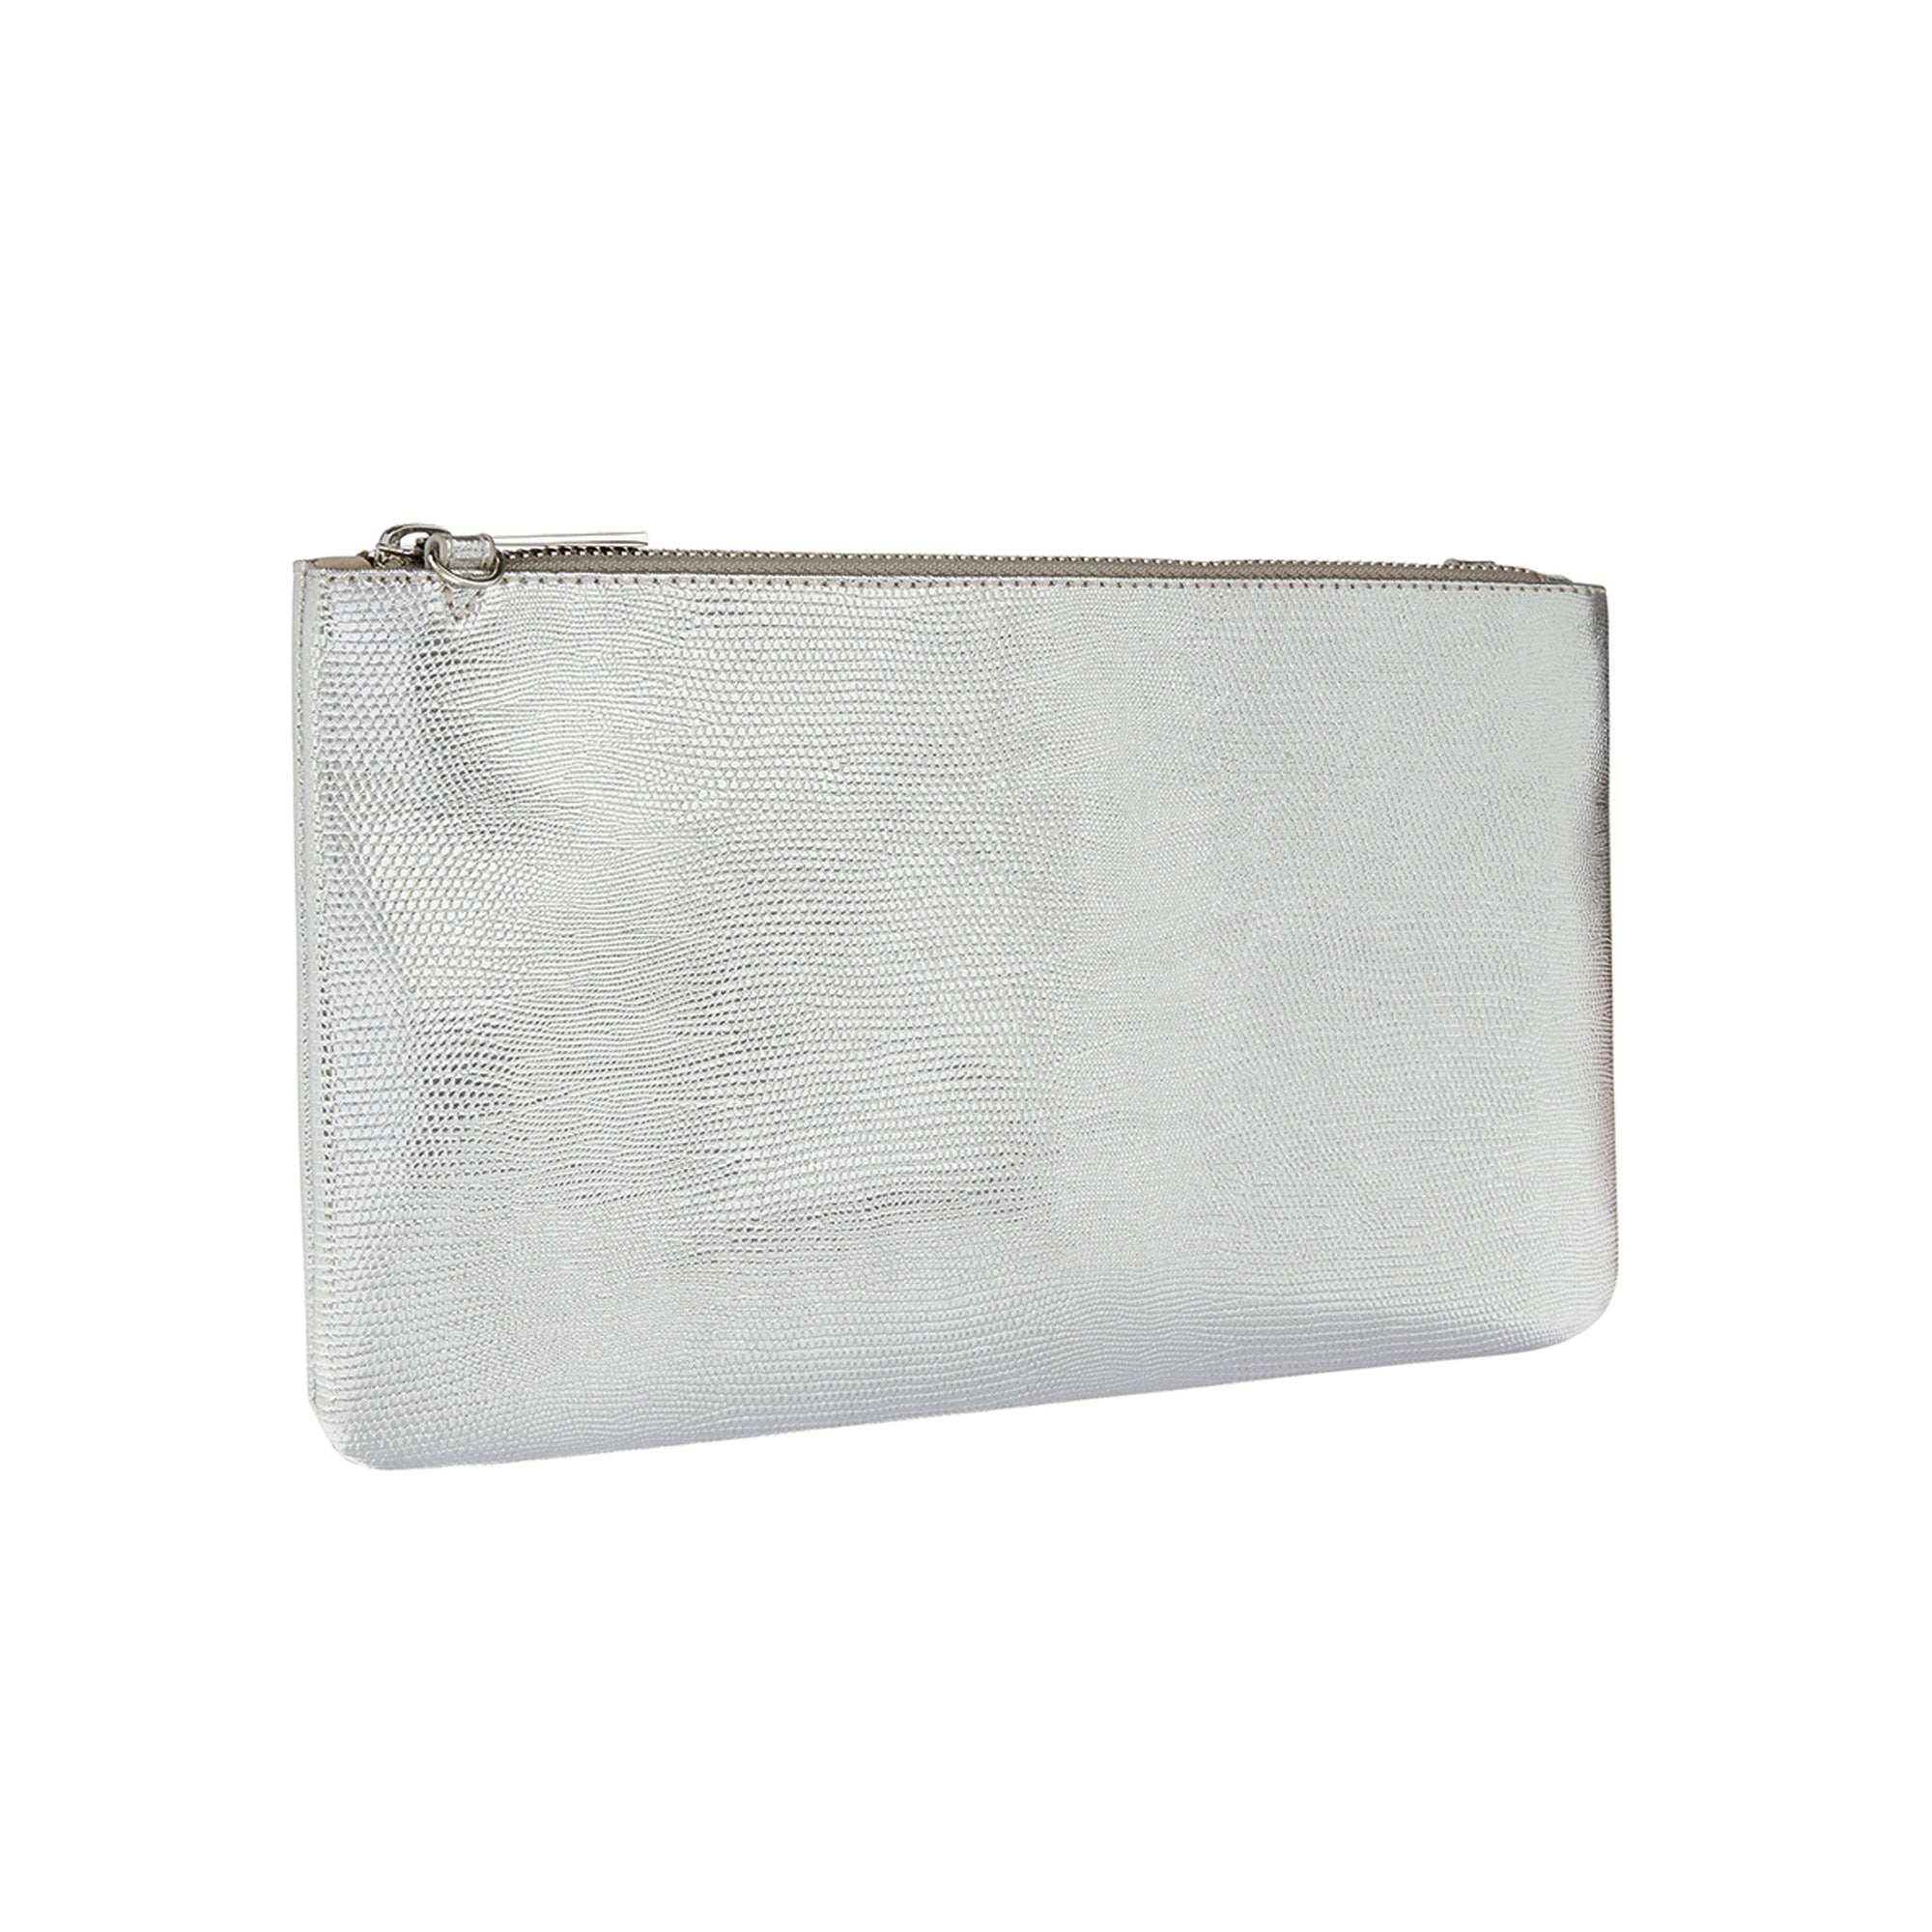 sugarcrush Luxury Silver Bling Clutch Buy sugarcrush Luxury Silver Bling  Clutch Online at Best Price in India  Nykaa